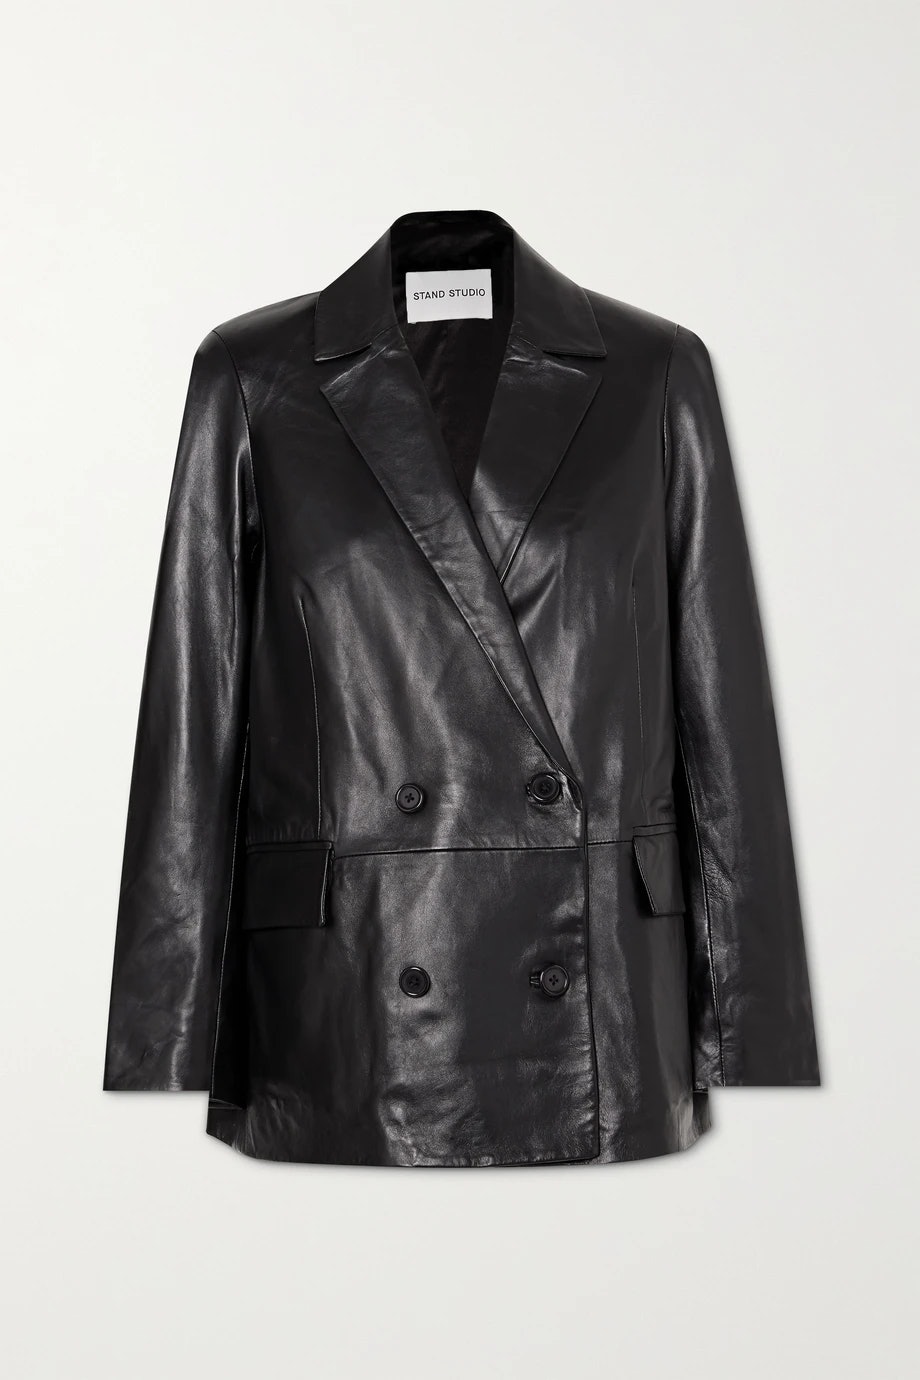 13 Ways To Wear Leather For Summer — And Not Overheat